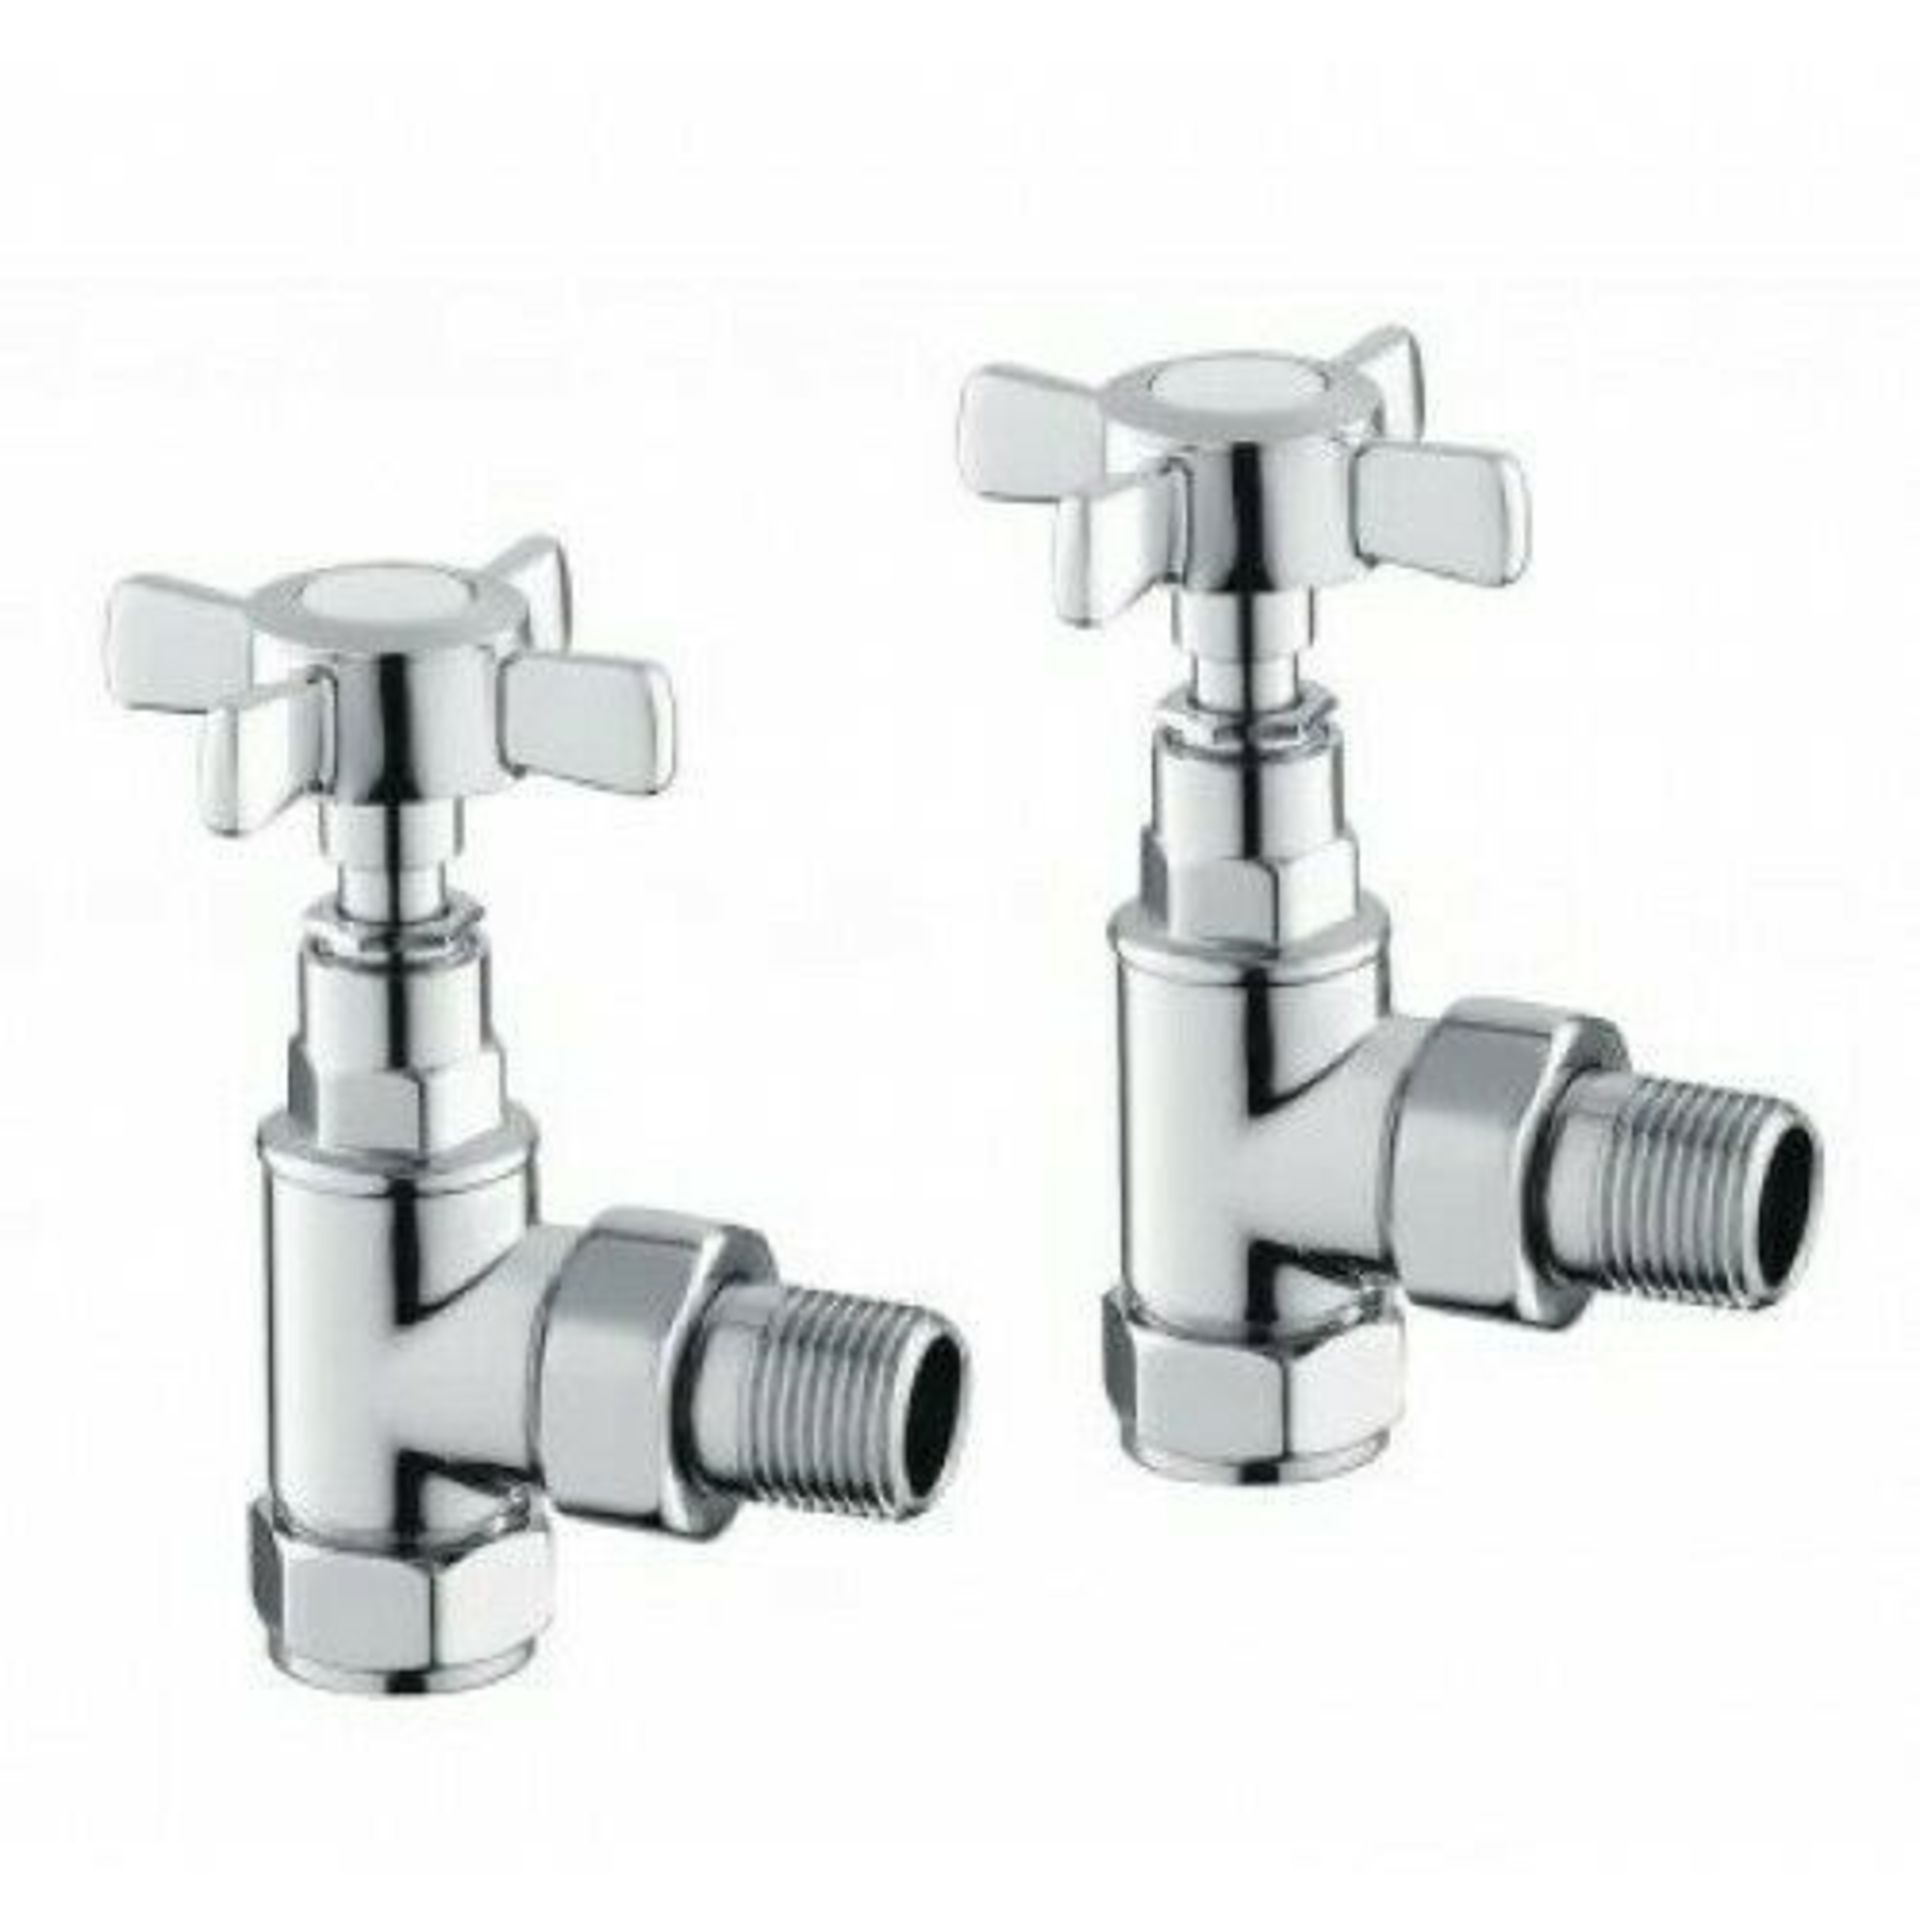 Traditional Angled Heated Towel Rail Radiator Valves Cross Head Pair 15mm Manual. Ra04A For Th... - Image 2 of 2